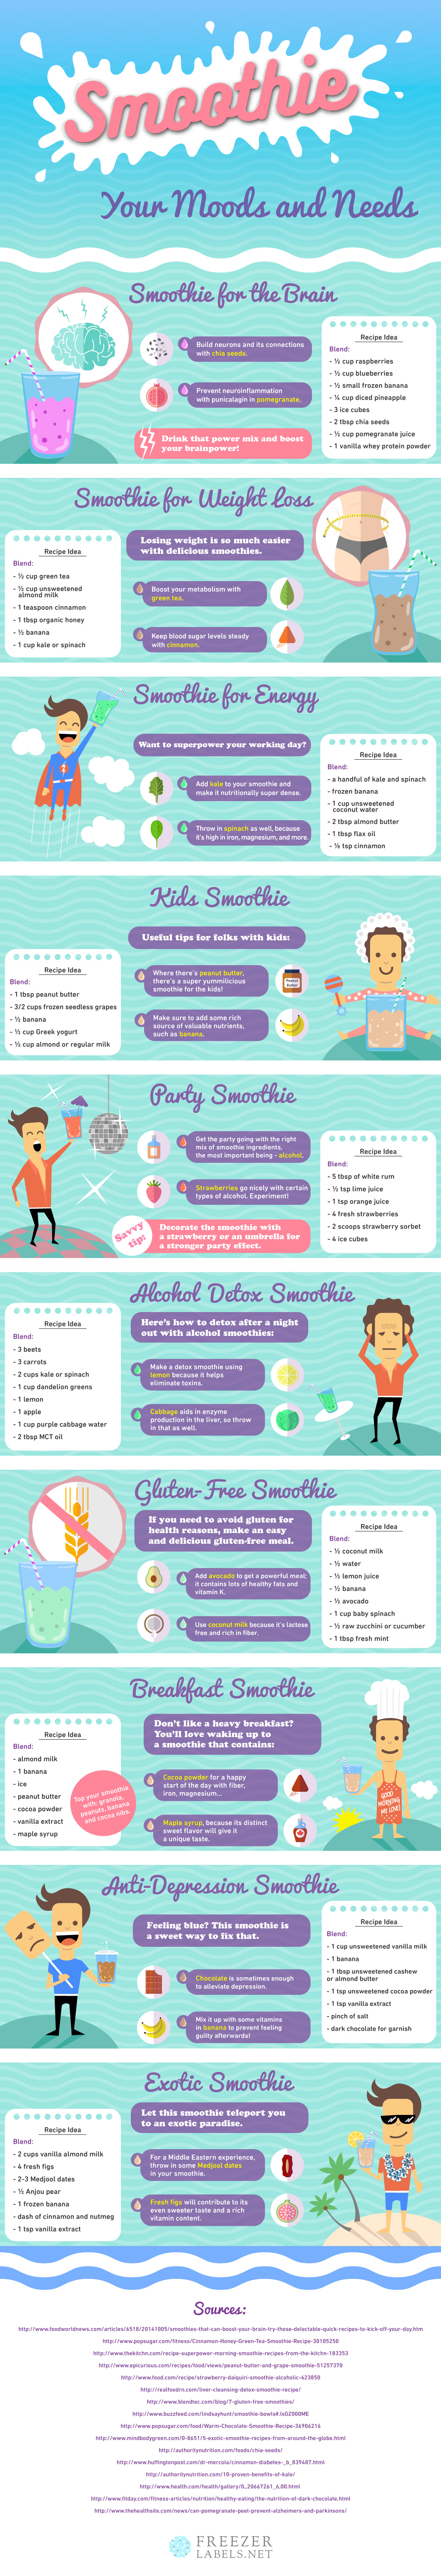 10 Smoothies for Different Occasions infographic